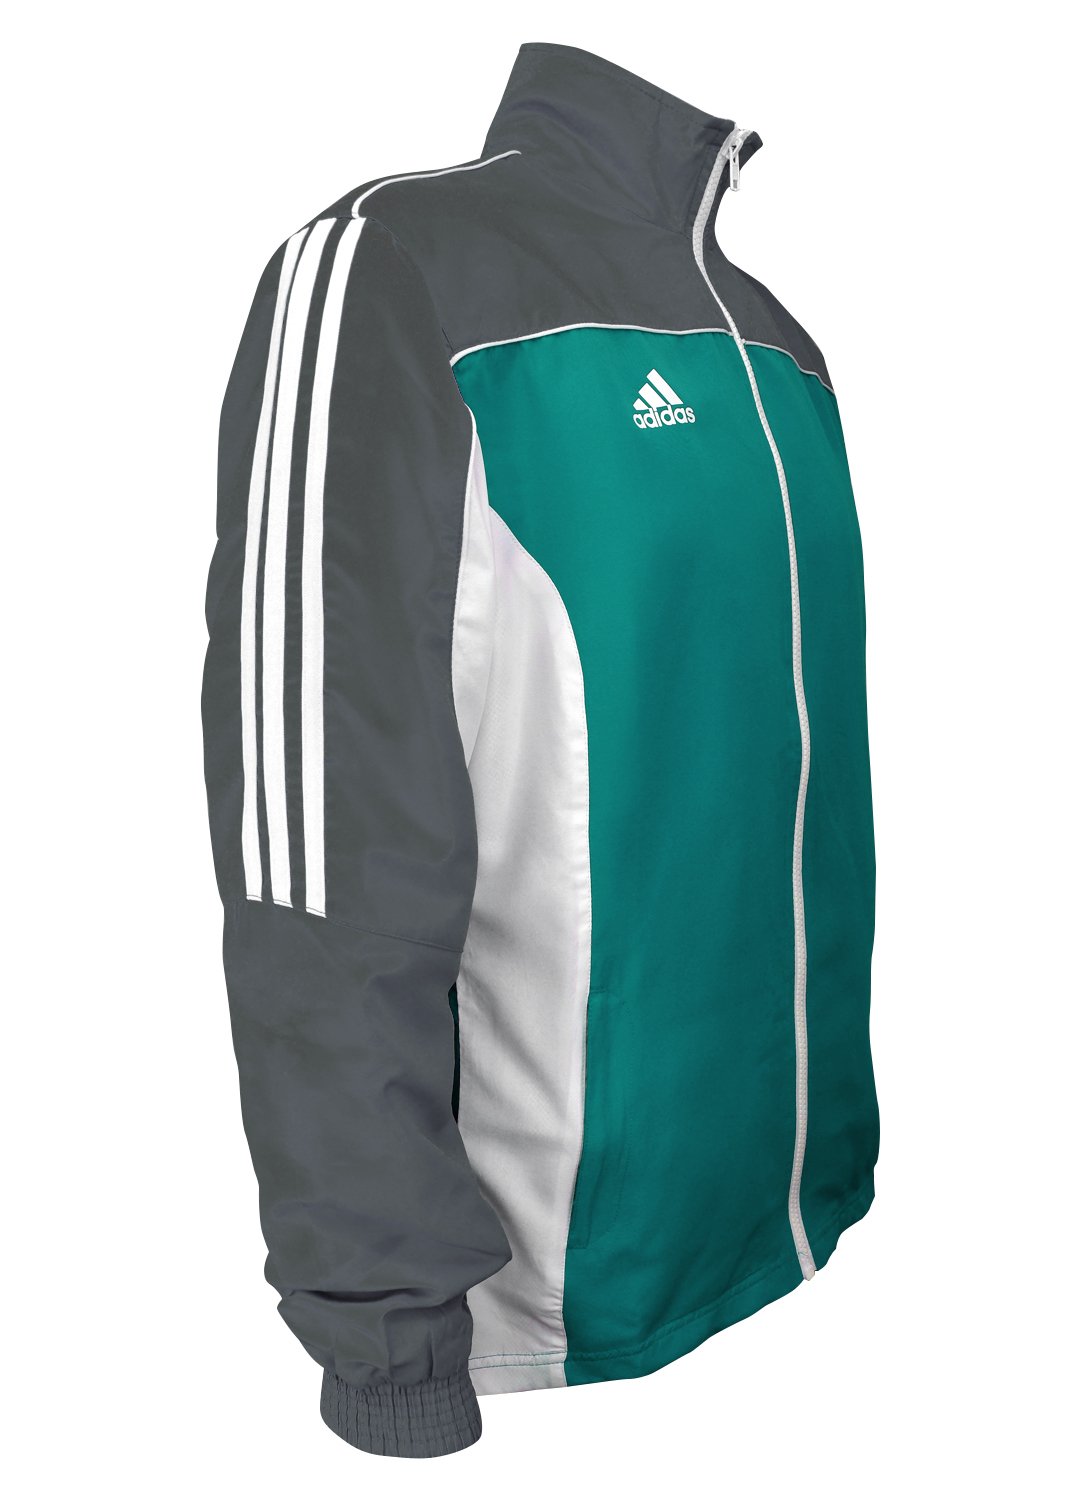 adidas Martial Arts 3-Stripes Light Tracksuit 100% Polyester Long Sleeve Jacket – Teal/Gray/White